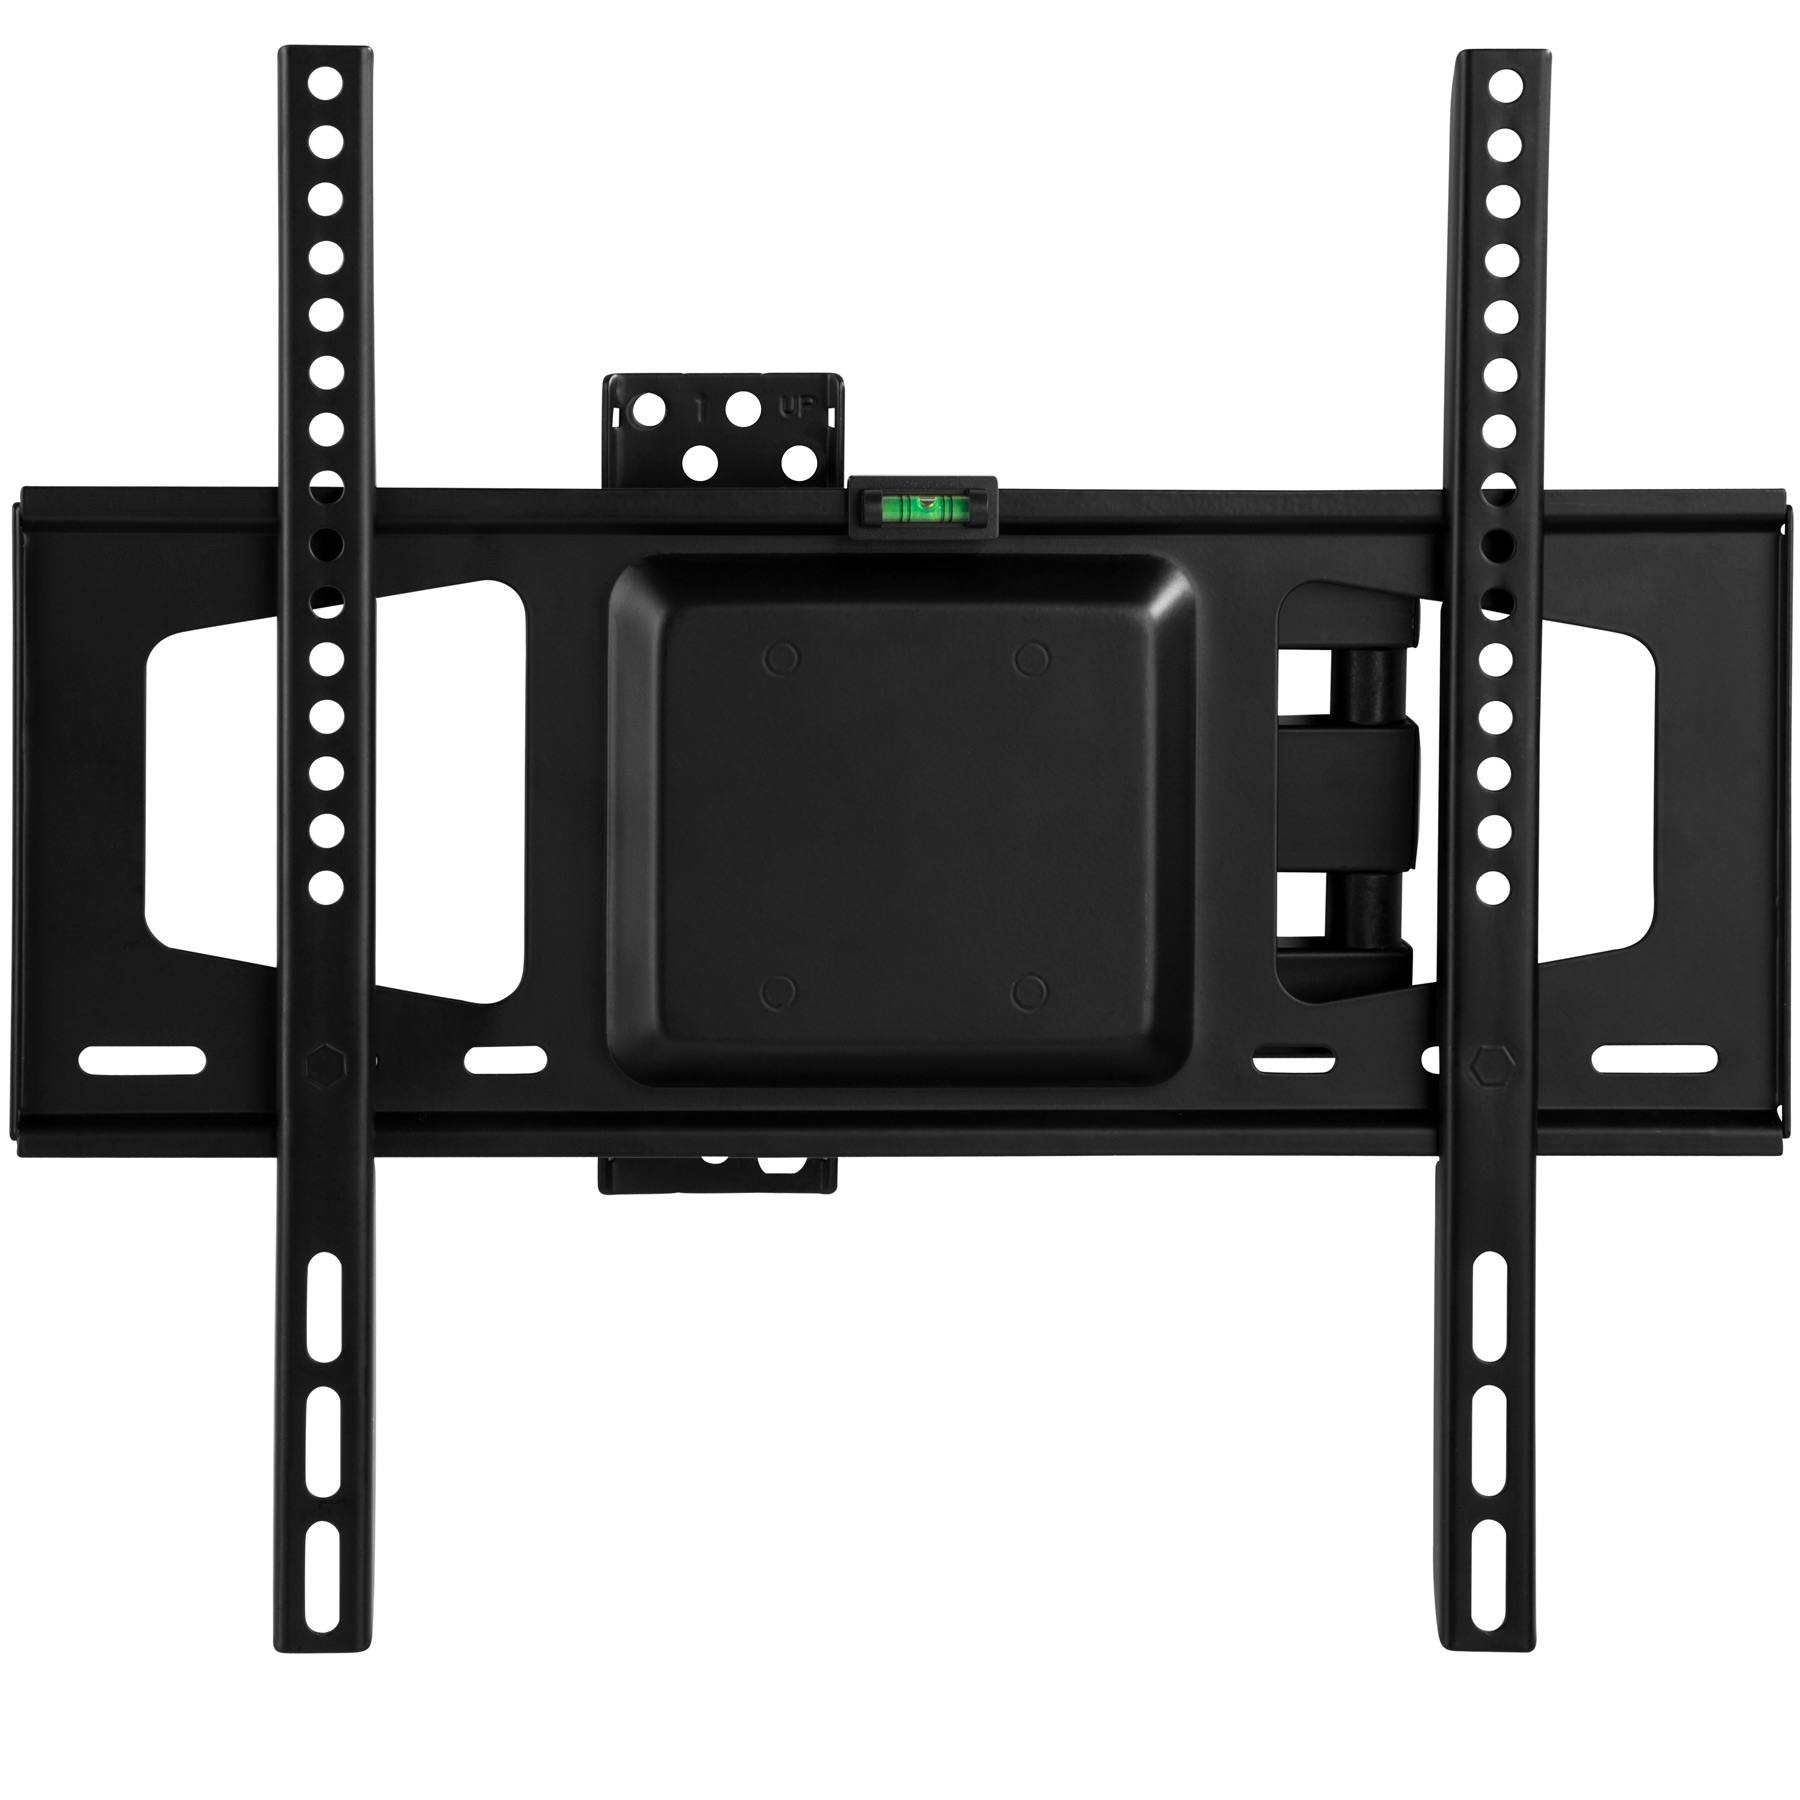 Tectake support mural tv 32- 55 orientable et inclinable,vesa